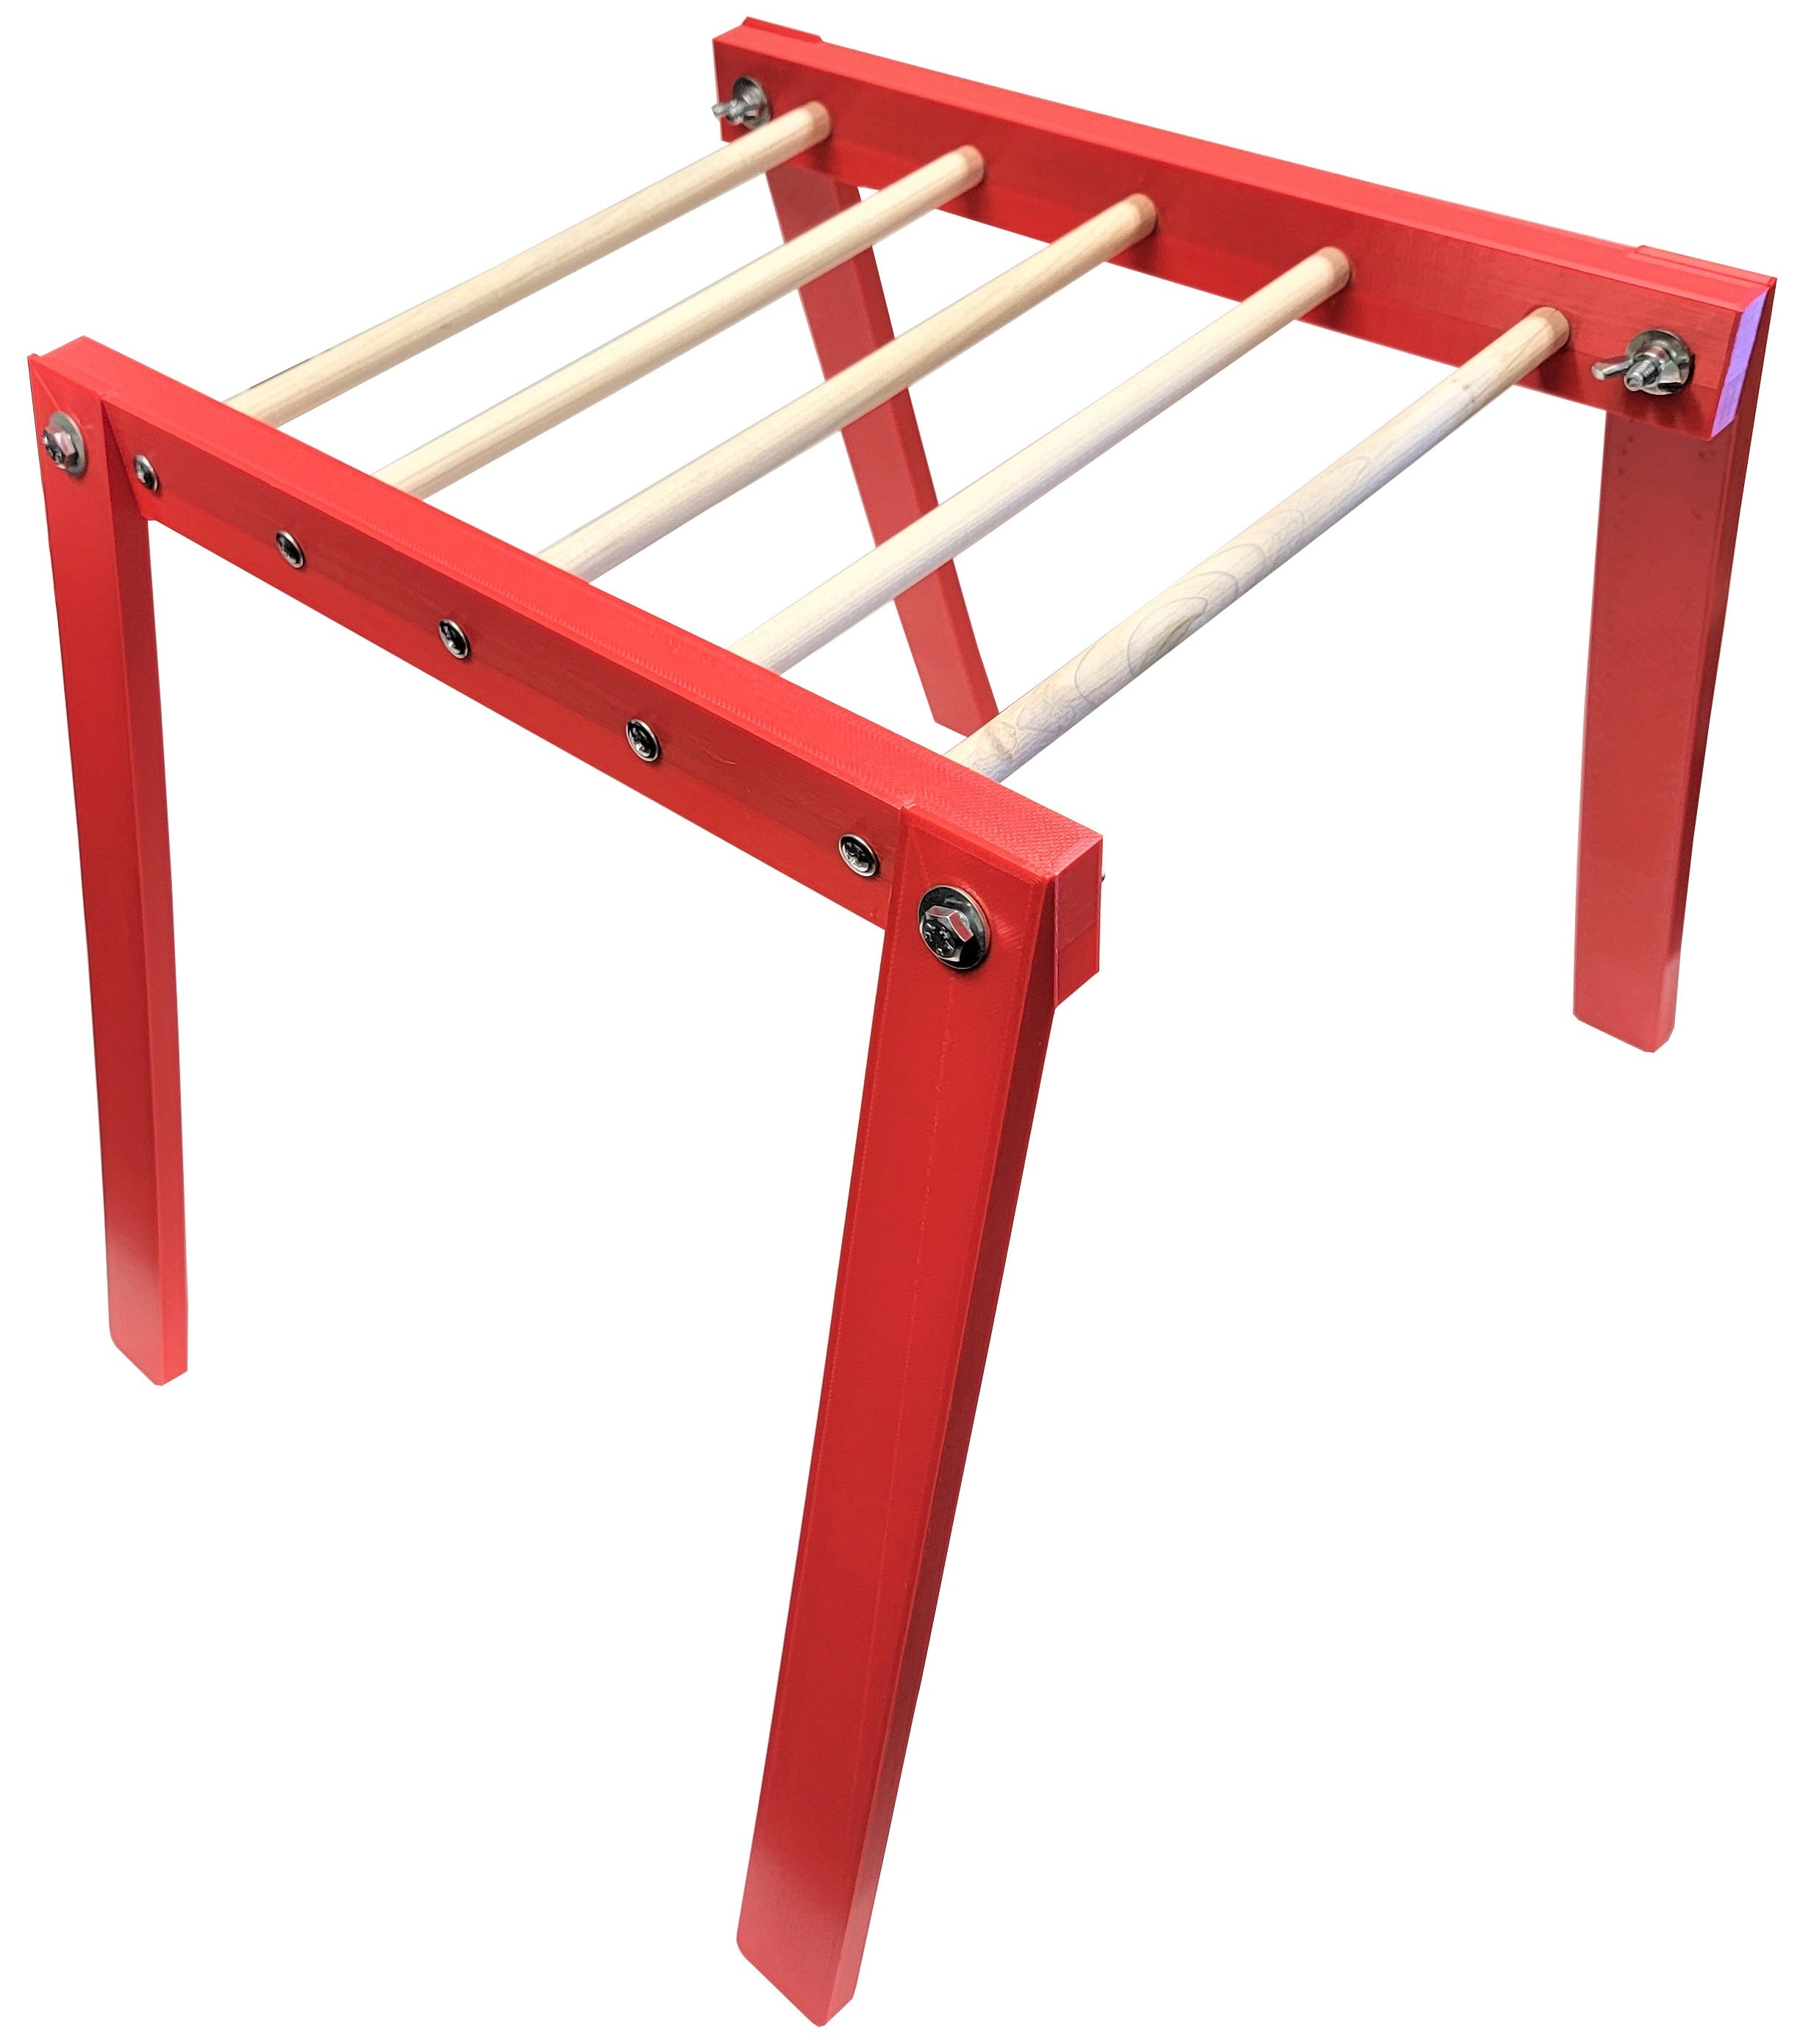 20.5 Inch Long Red Chicken Monkey Bars Poultry Perch